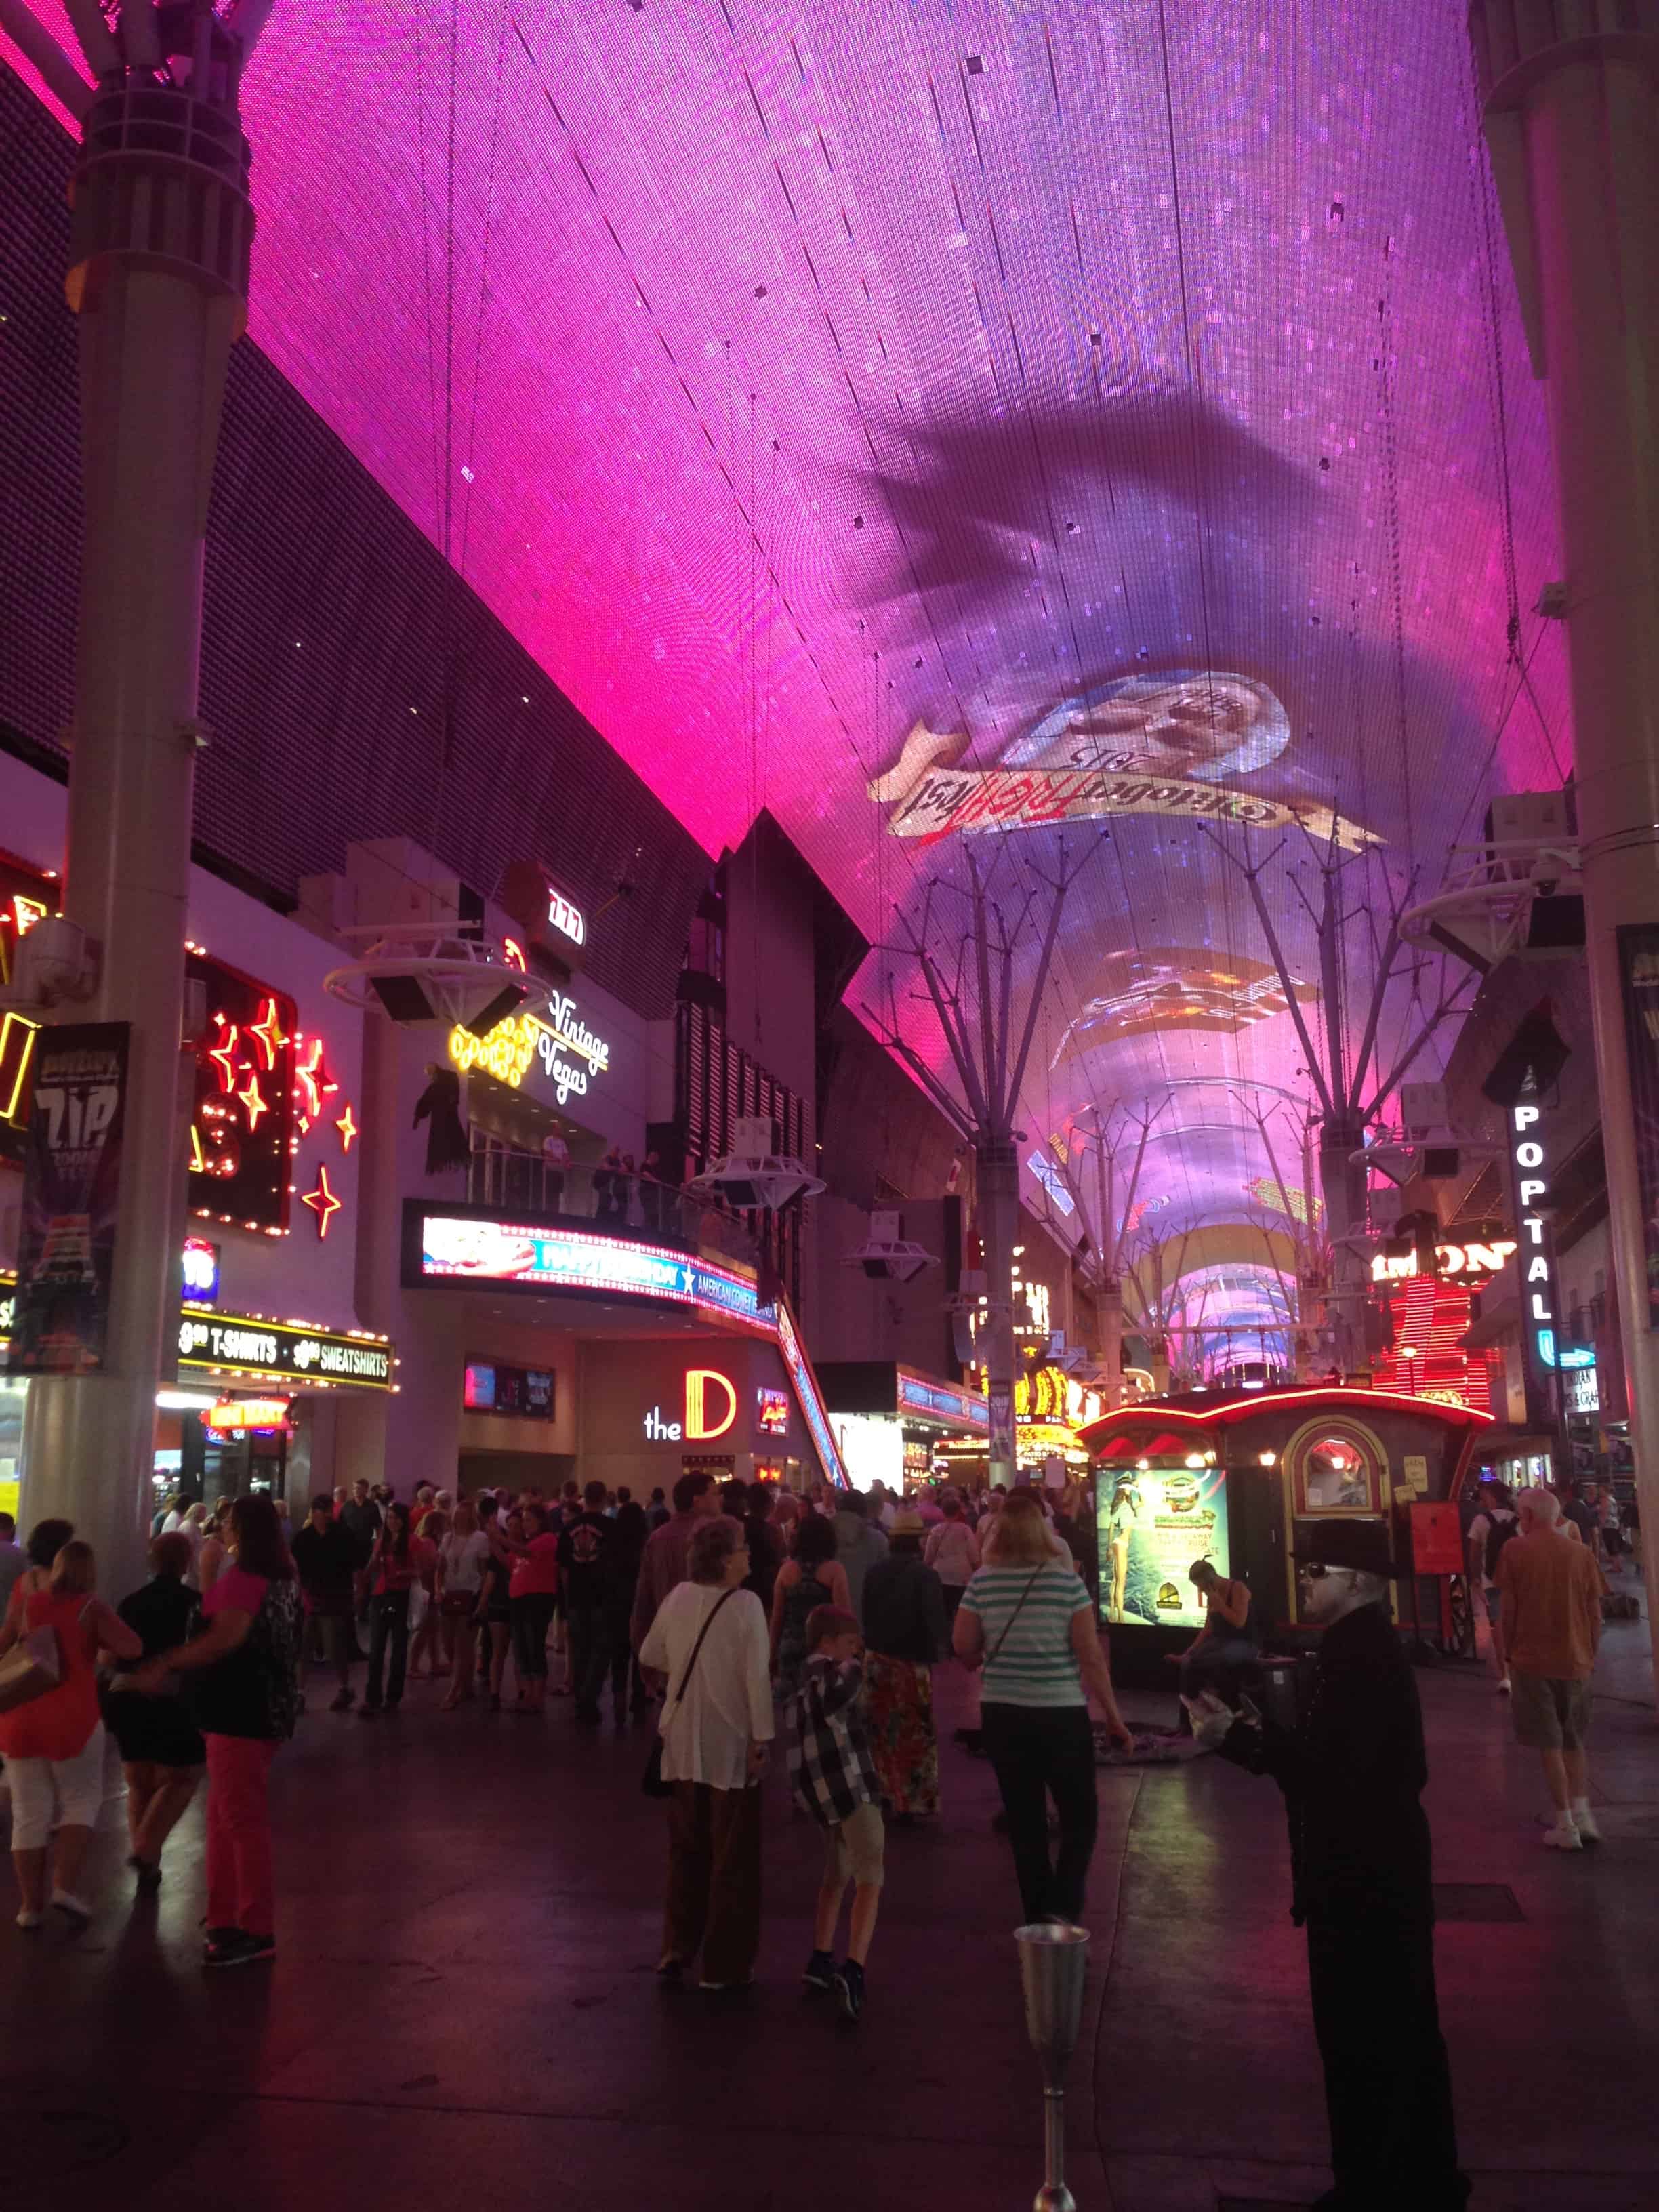 LED canopy covering the street at the Fremont Street Experience in Las Vegas, Nevada